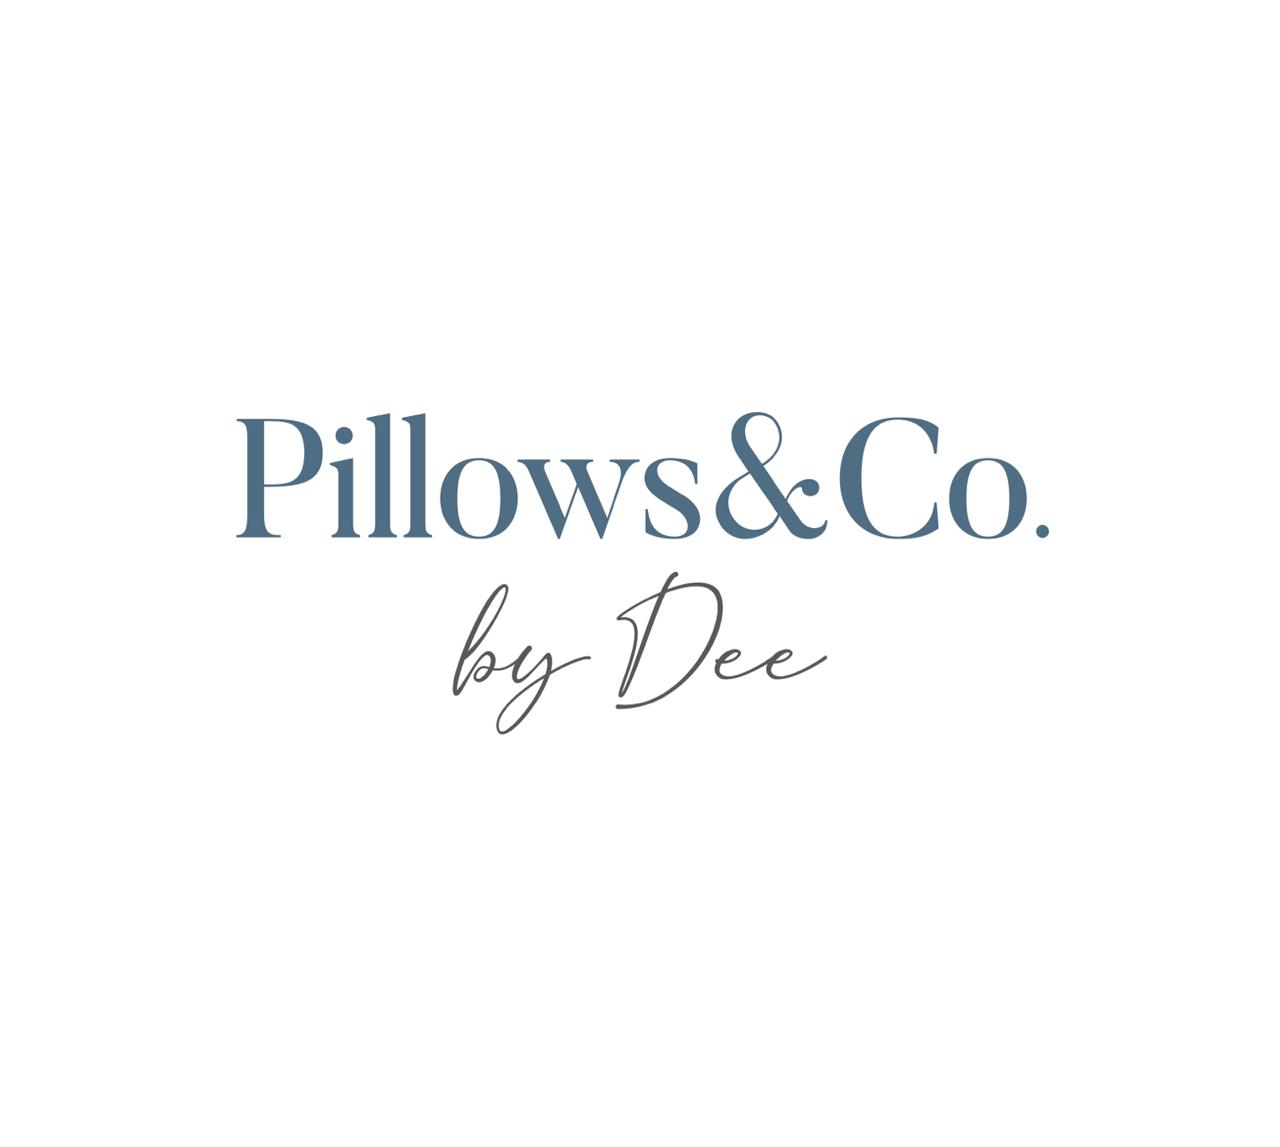 Pillows & co. by Dee